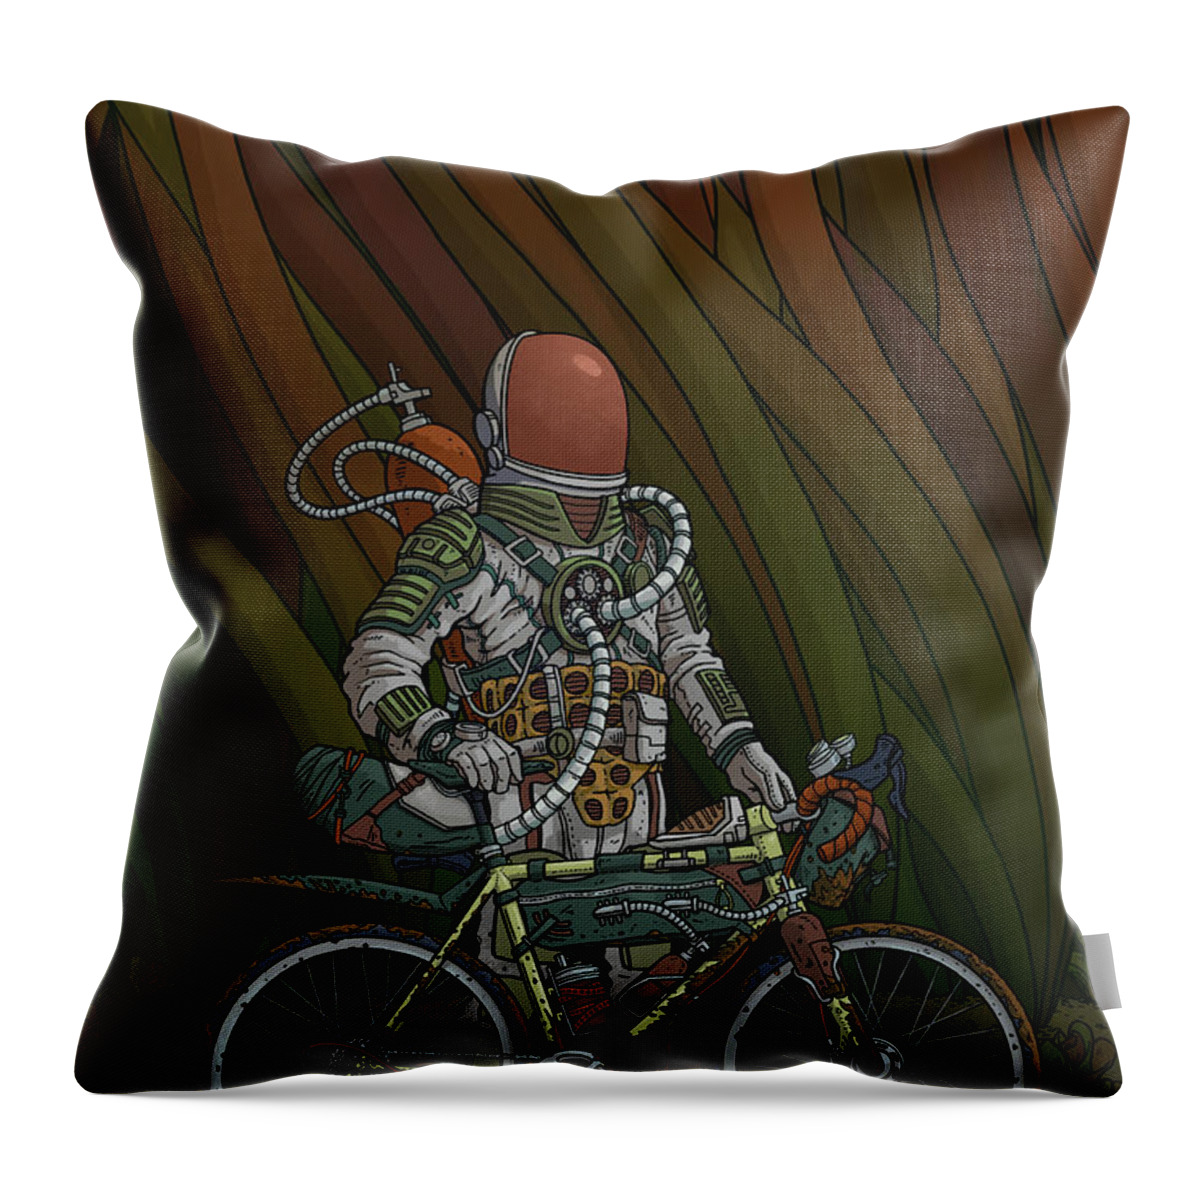 Procreate Throw Pillow featuring the digital art North Branch, 140psi by EvanArt - Evan Miller